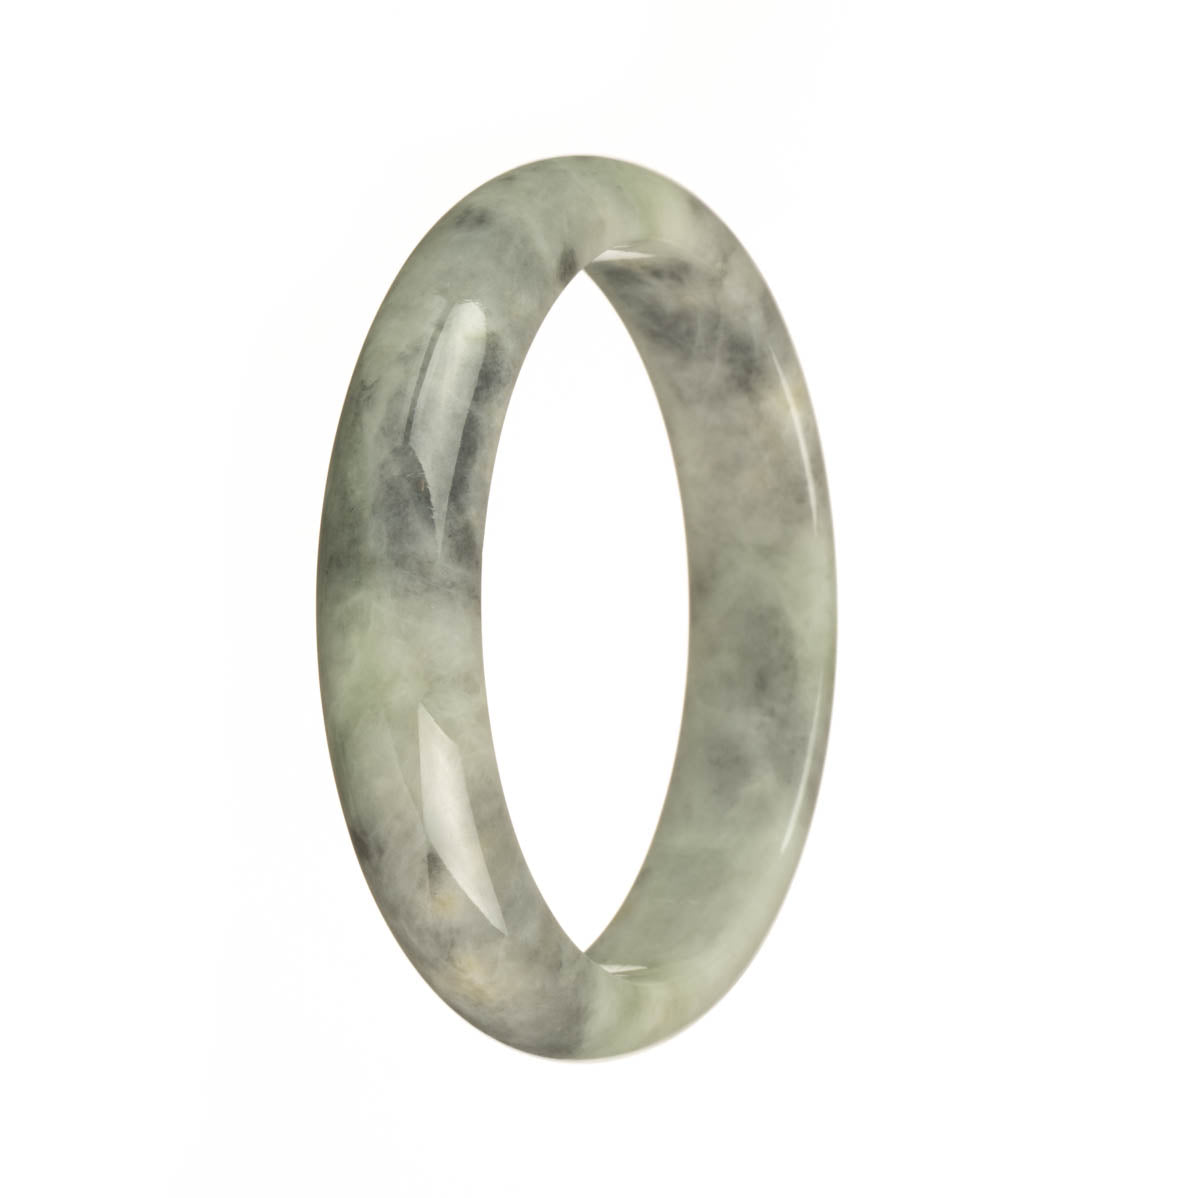 A pale green jadeite jade bracelet with a grey pattern, featuring a 58mm half moon design.